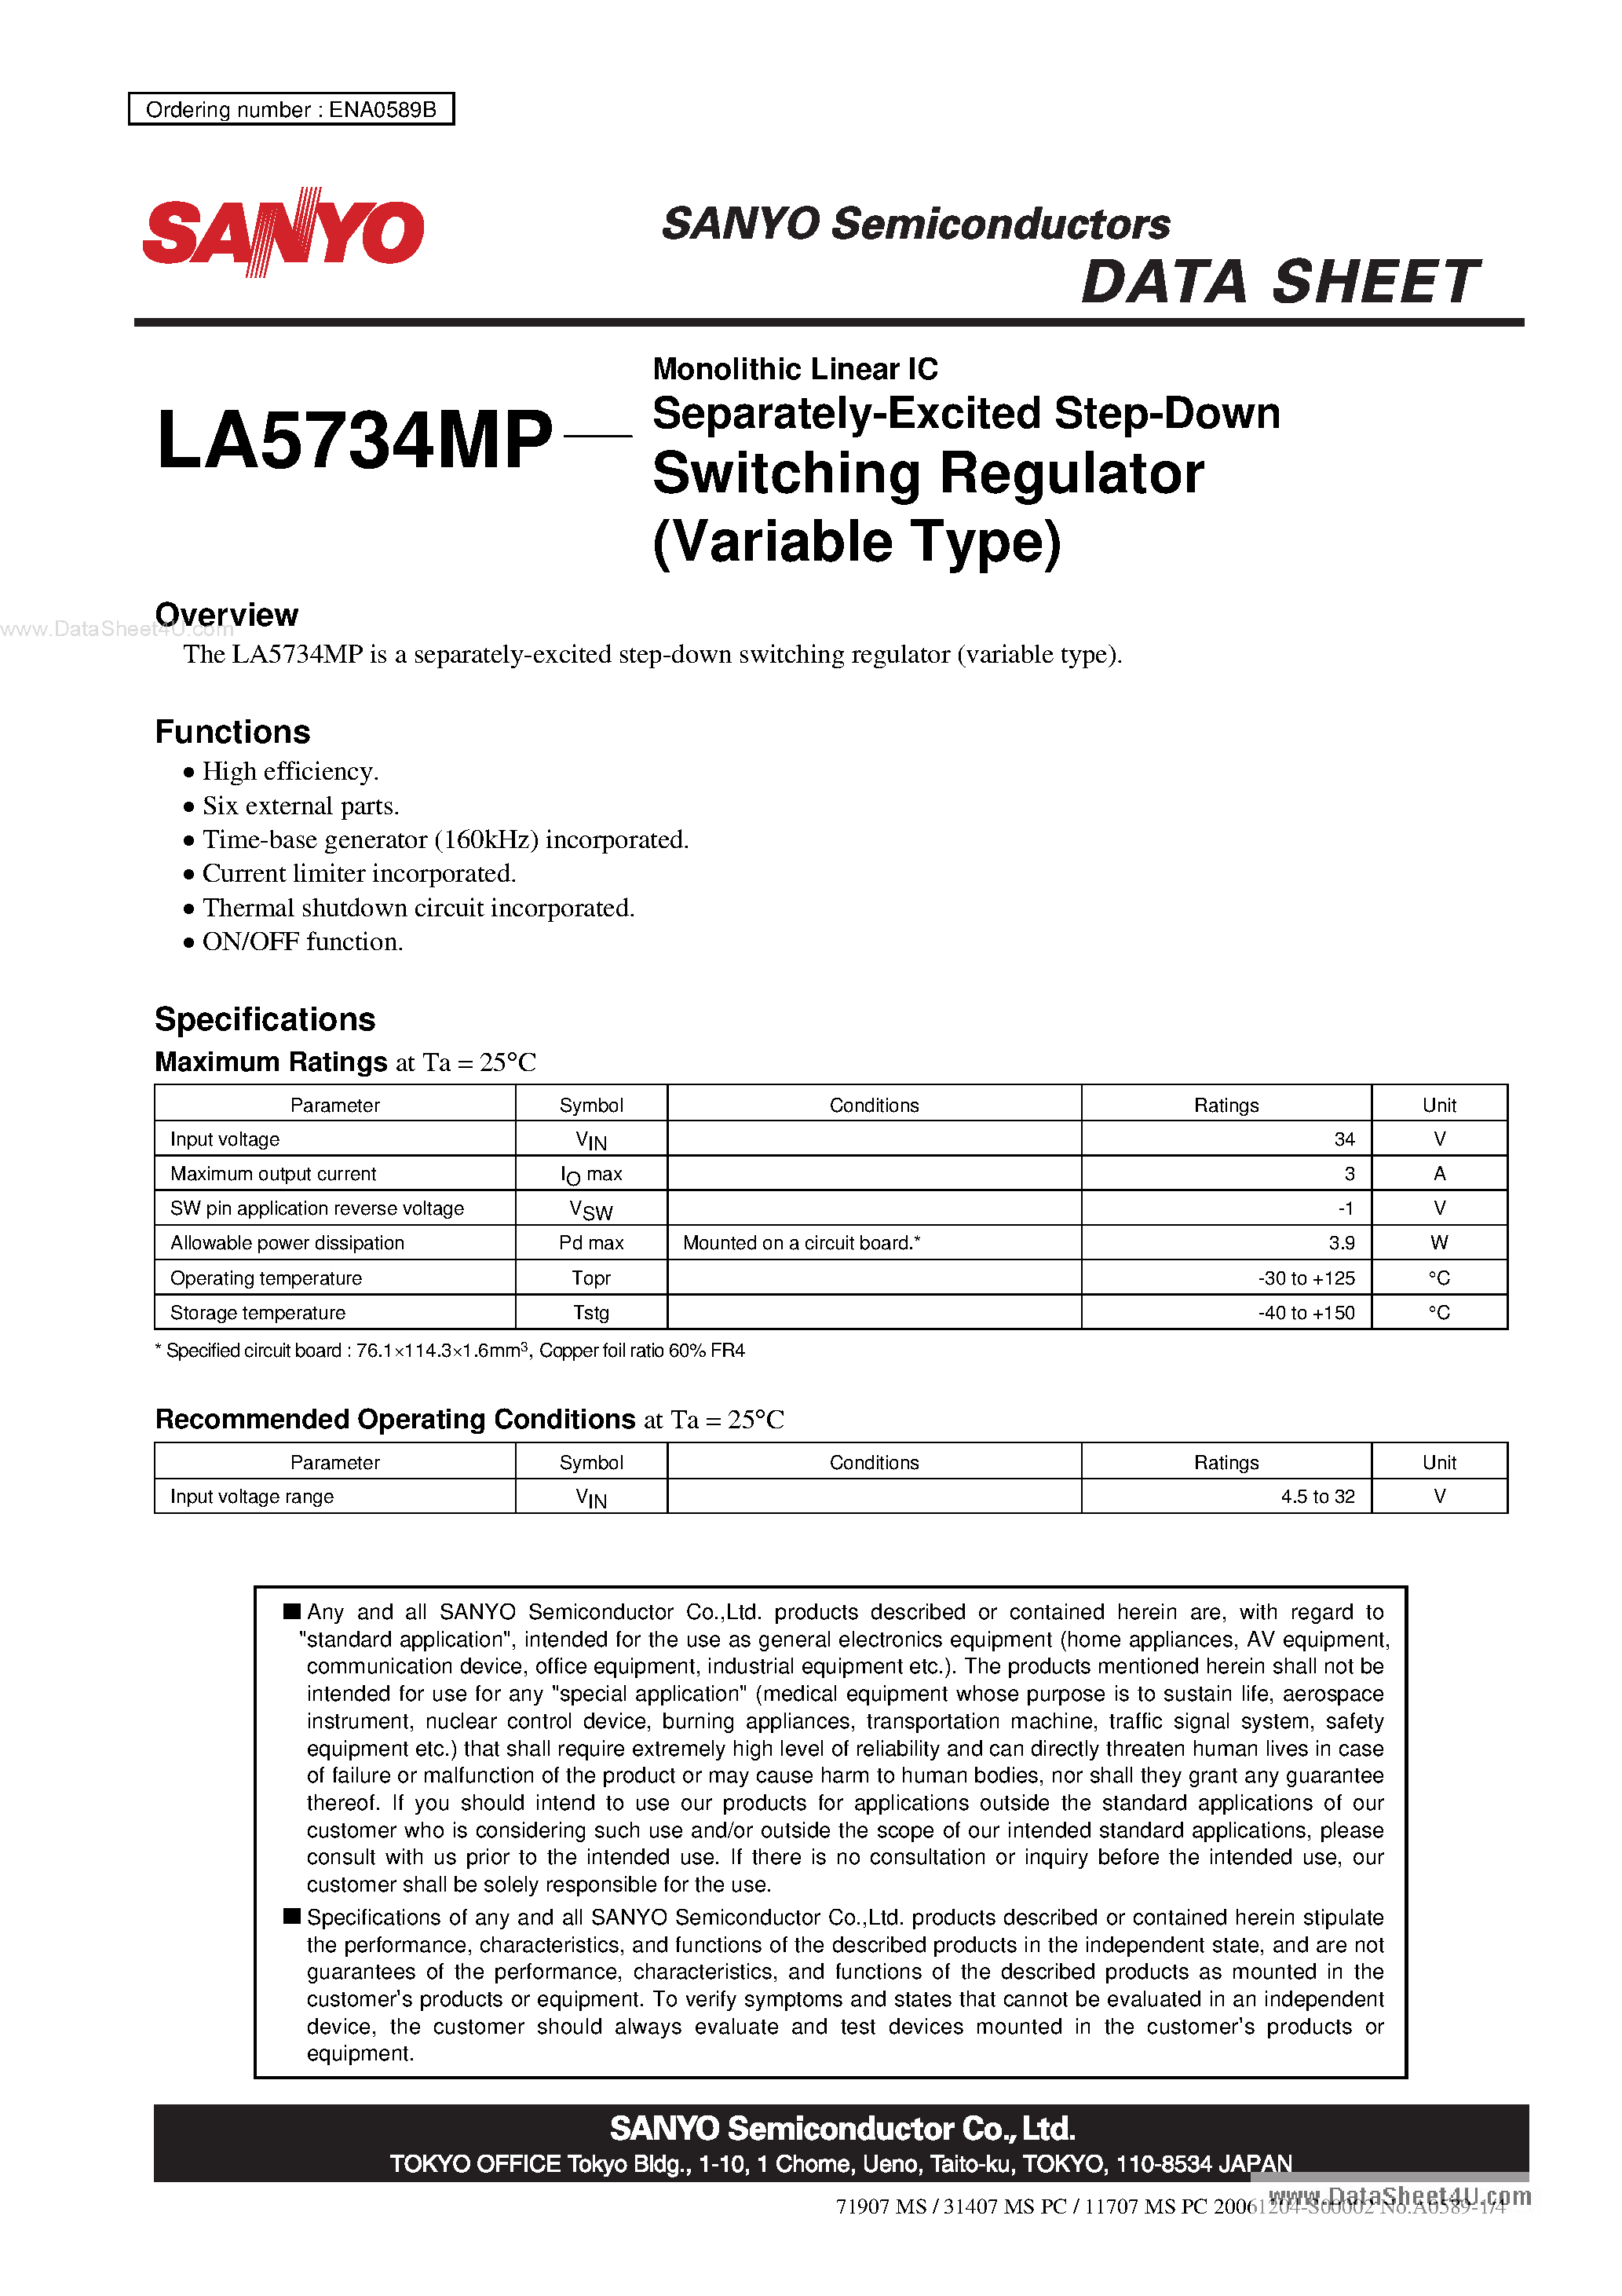 Даташит LA5734MP-Monolithic Linear IC Separately-Excited Step-Down Switching Regulator страница 1